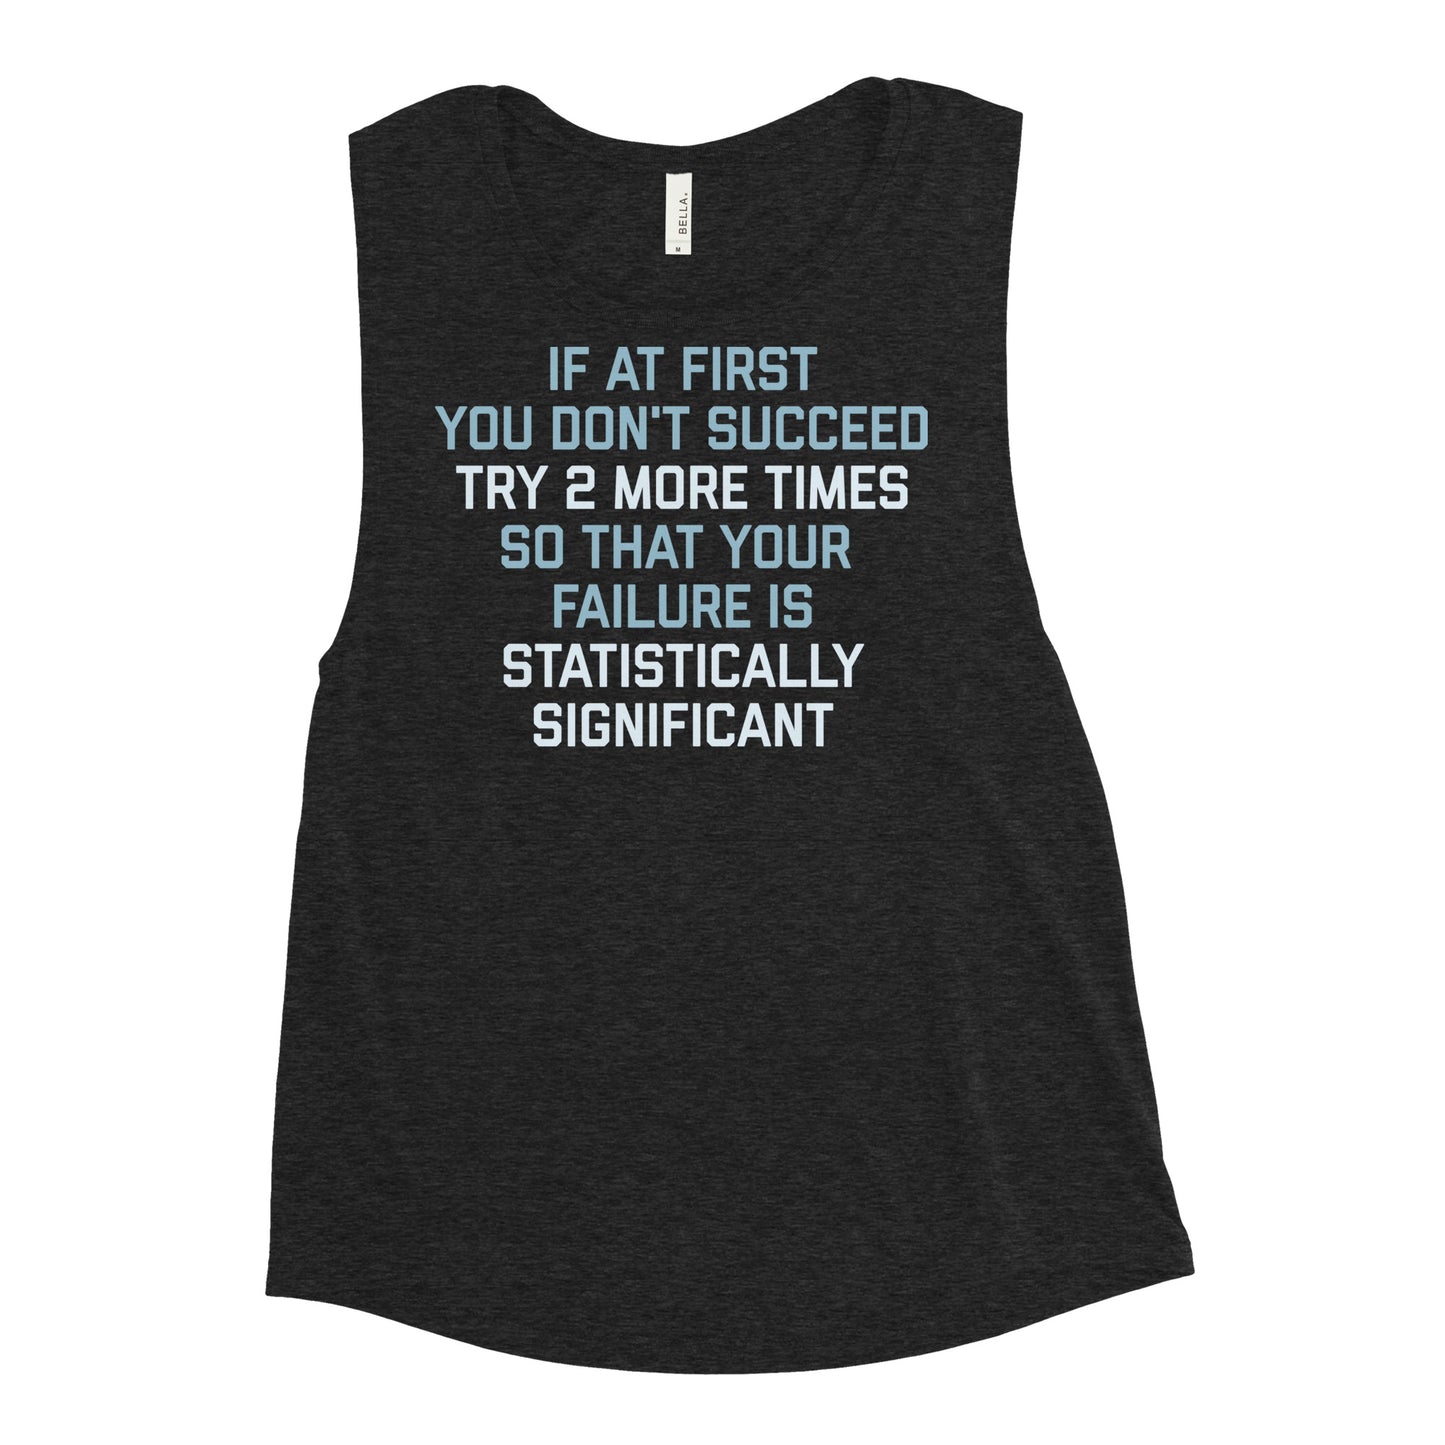 Try 2 More Times So That Your Failure Is Statistically Significant Women's Muscle Tank